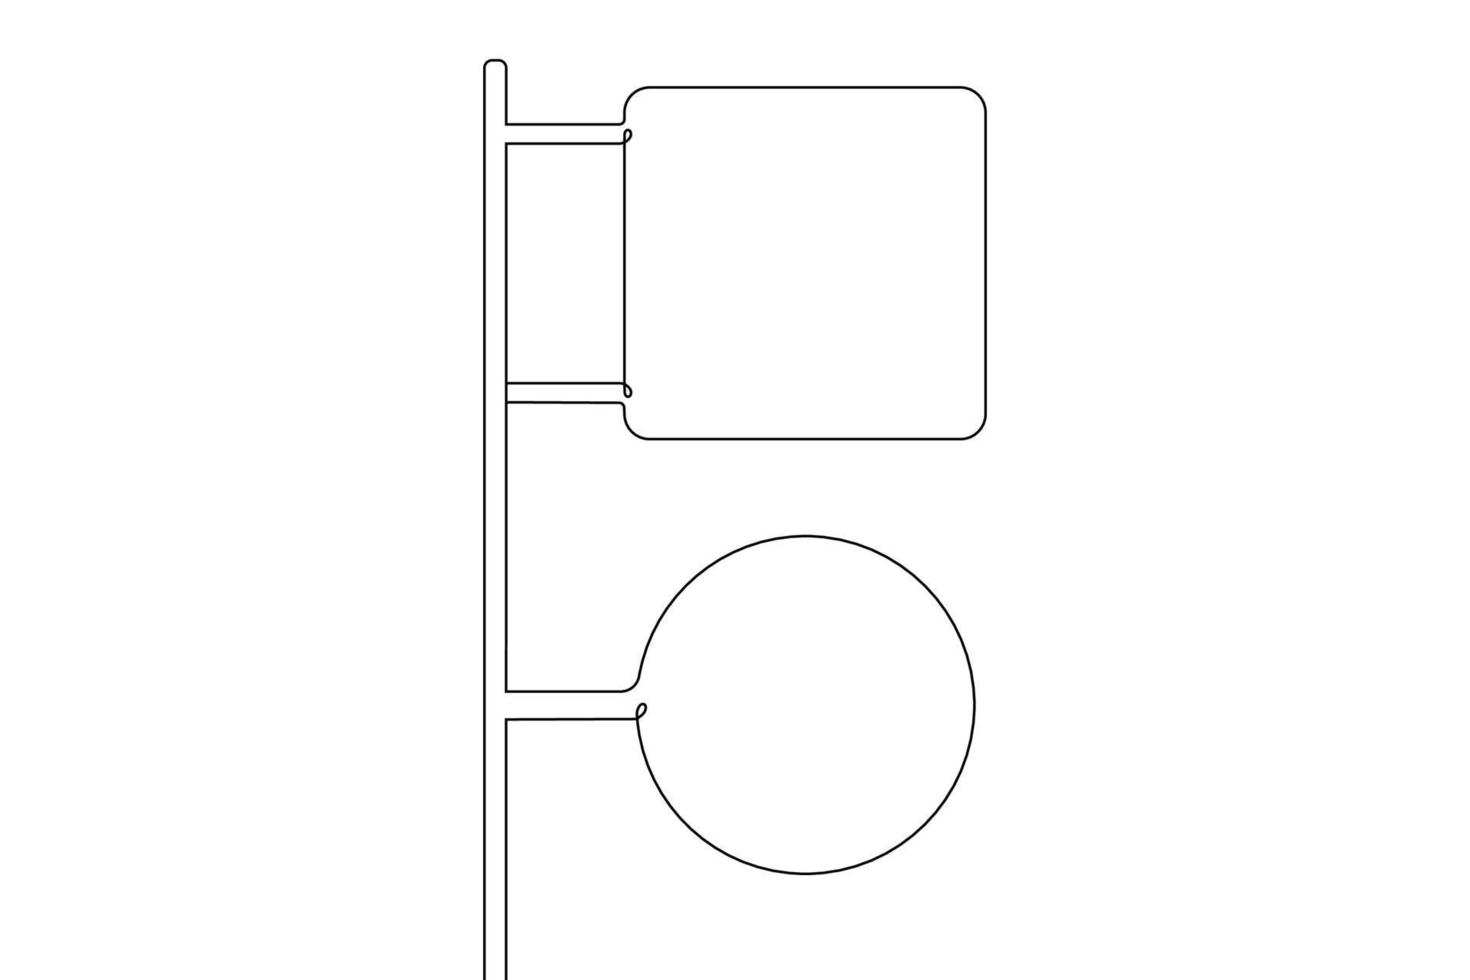 Single continuous line drawing template, set of road signs, Traffic signs on white background. Vector illustration.